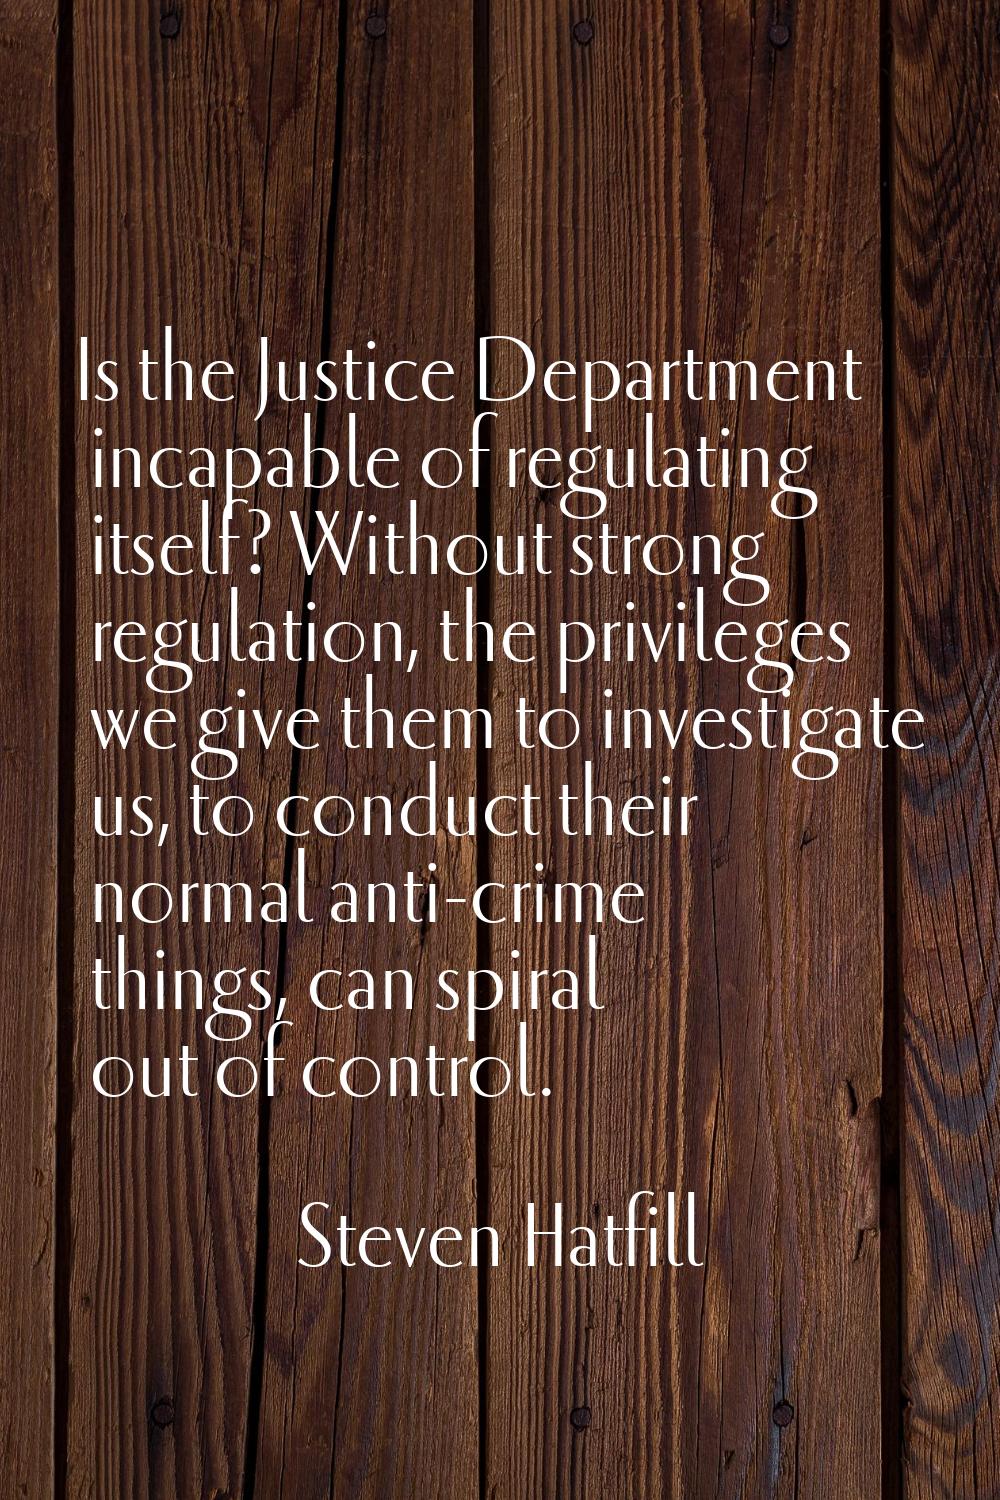 Is the Justice Department incapable of regulating itself? Without strong regulation, the privileges